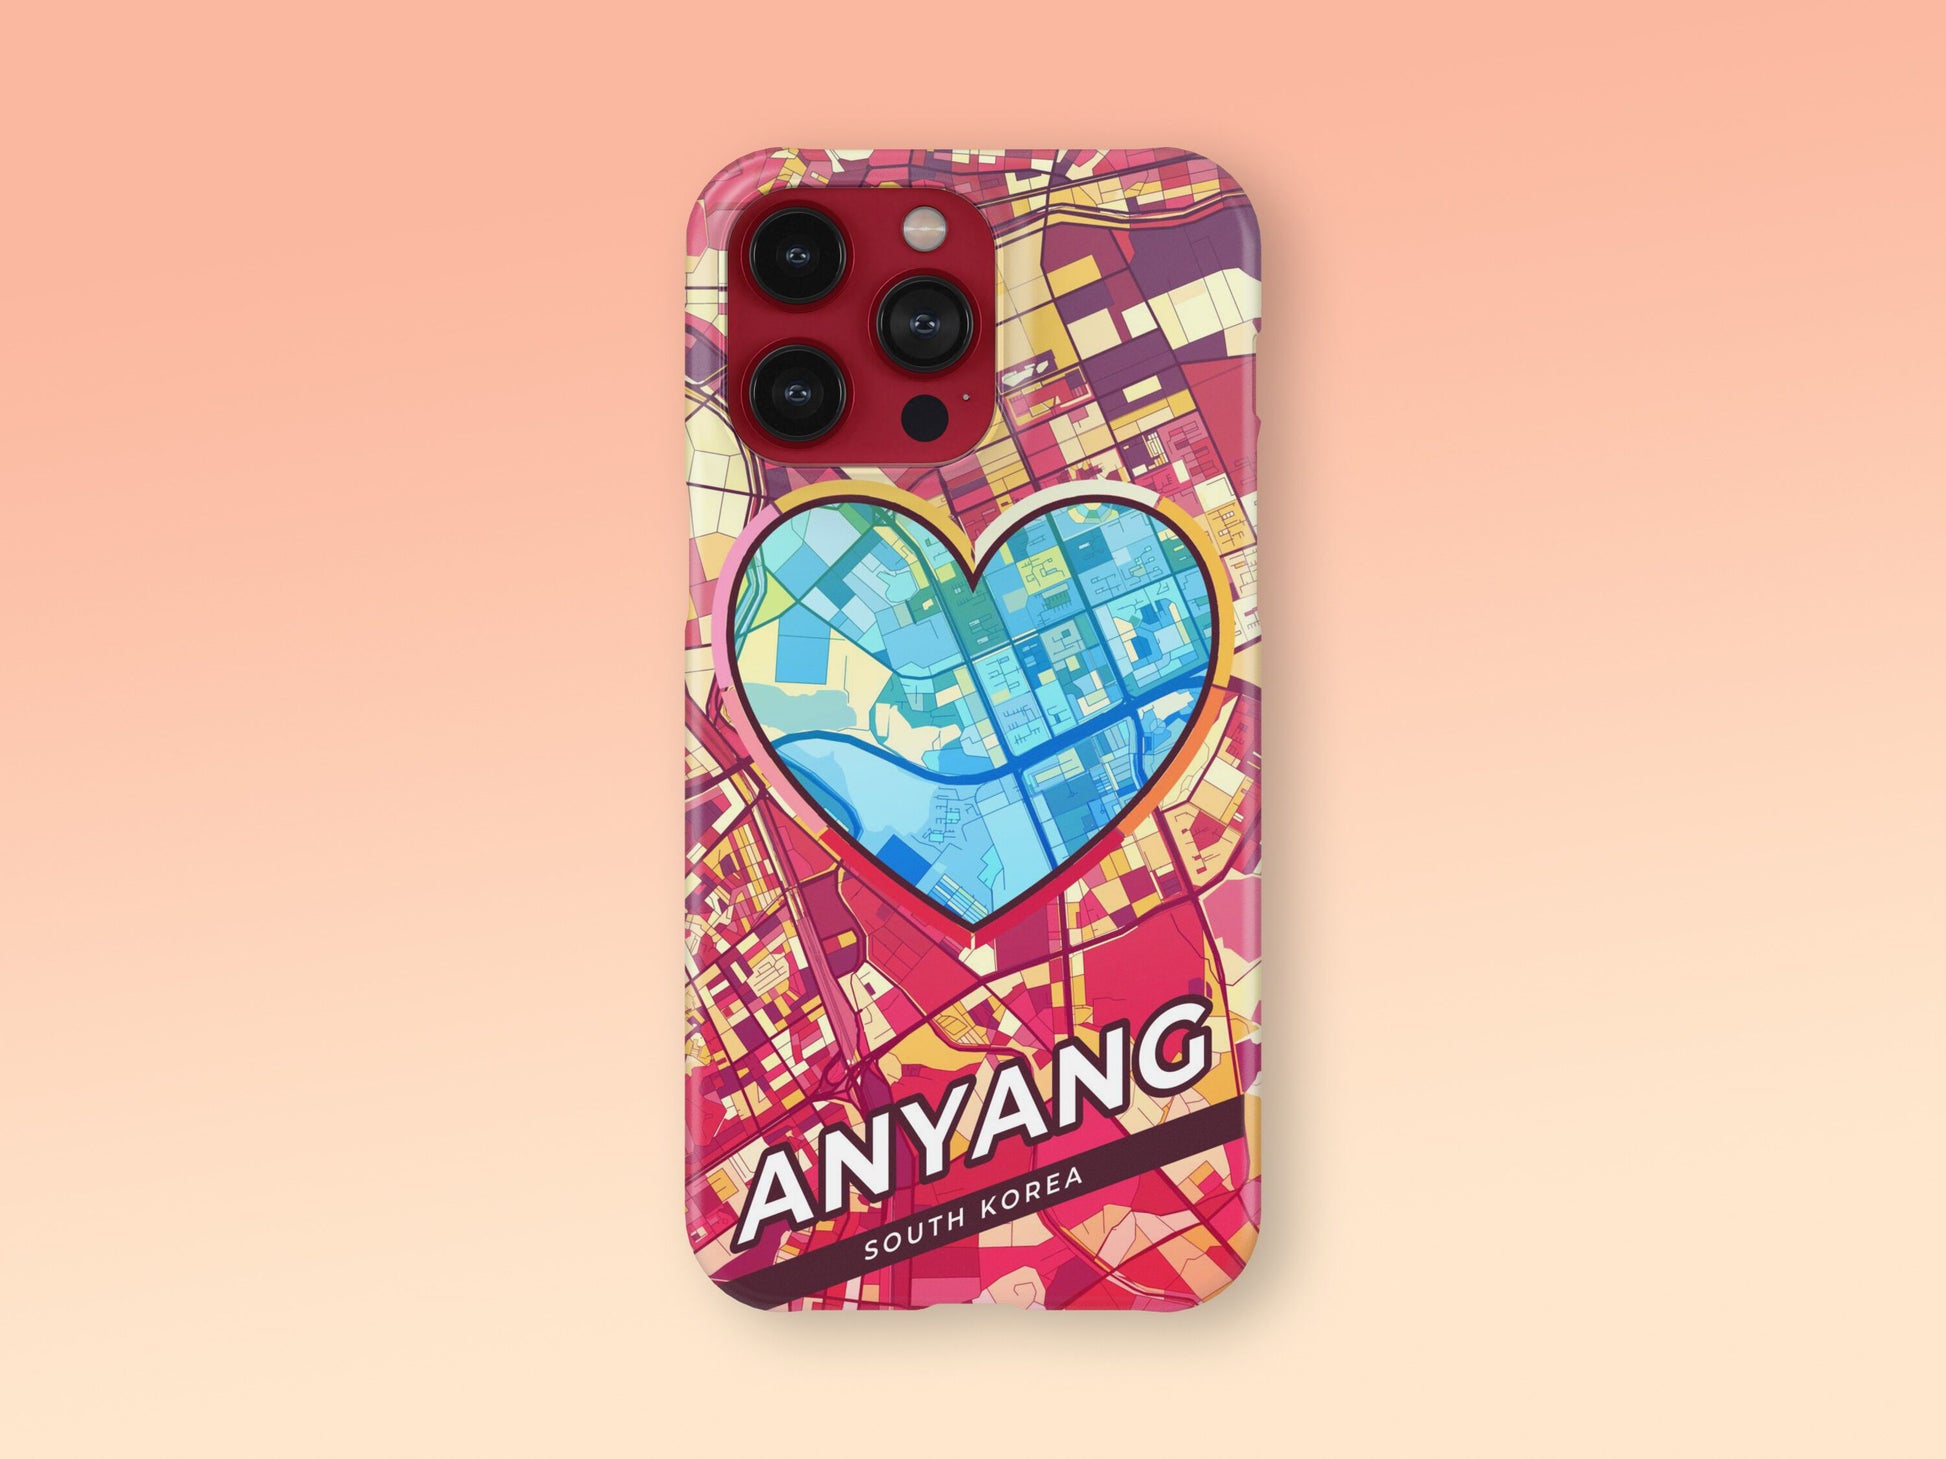 Anyang South Korea slim phone case with colorful icon. Birthday, wedding or housewarming gift. Couple match cases. 2